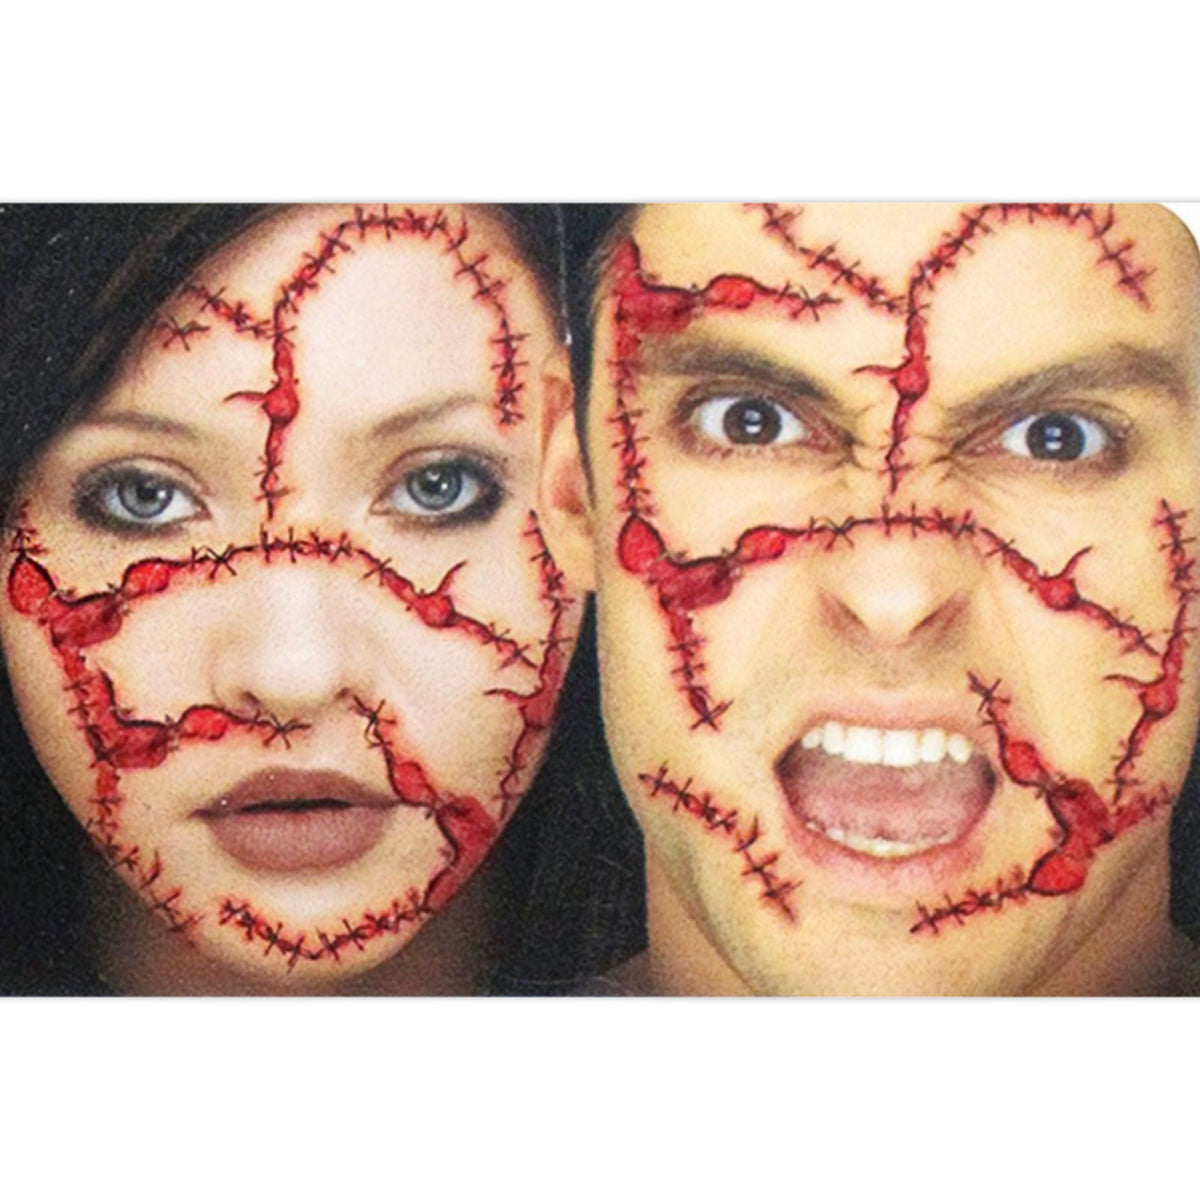 Slashed Face Temporary Tattoo and Bloody Scab Make up Kit Set Halloween Zombie